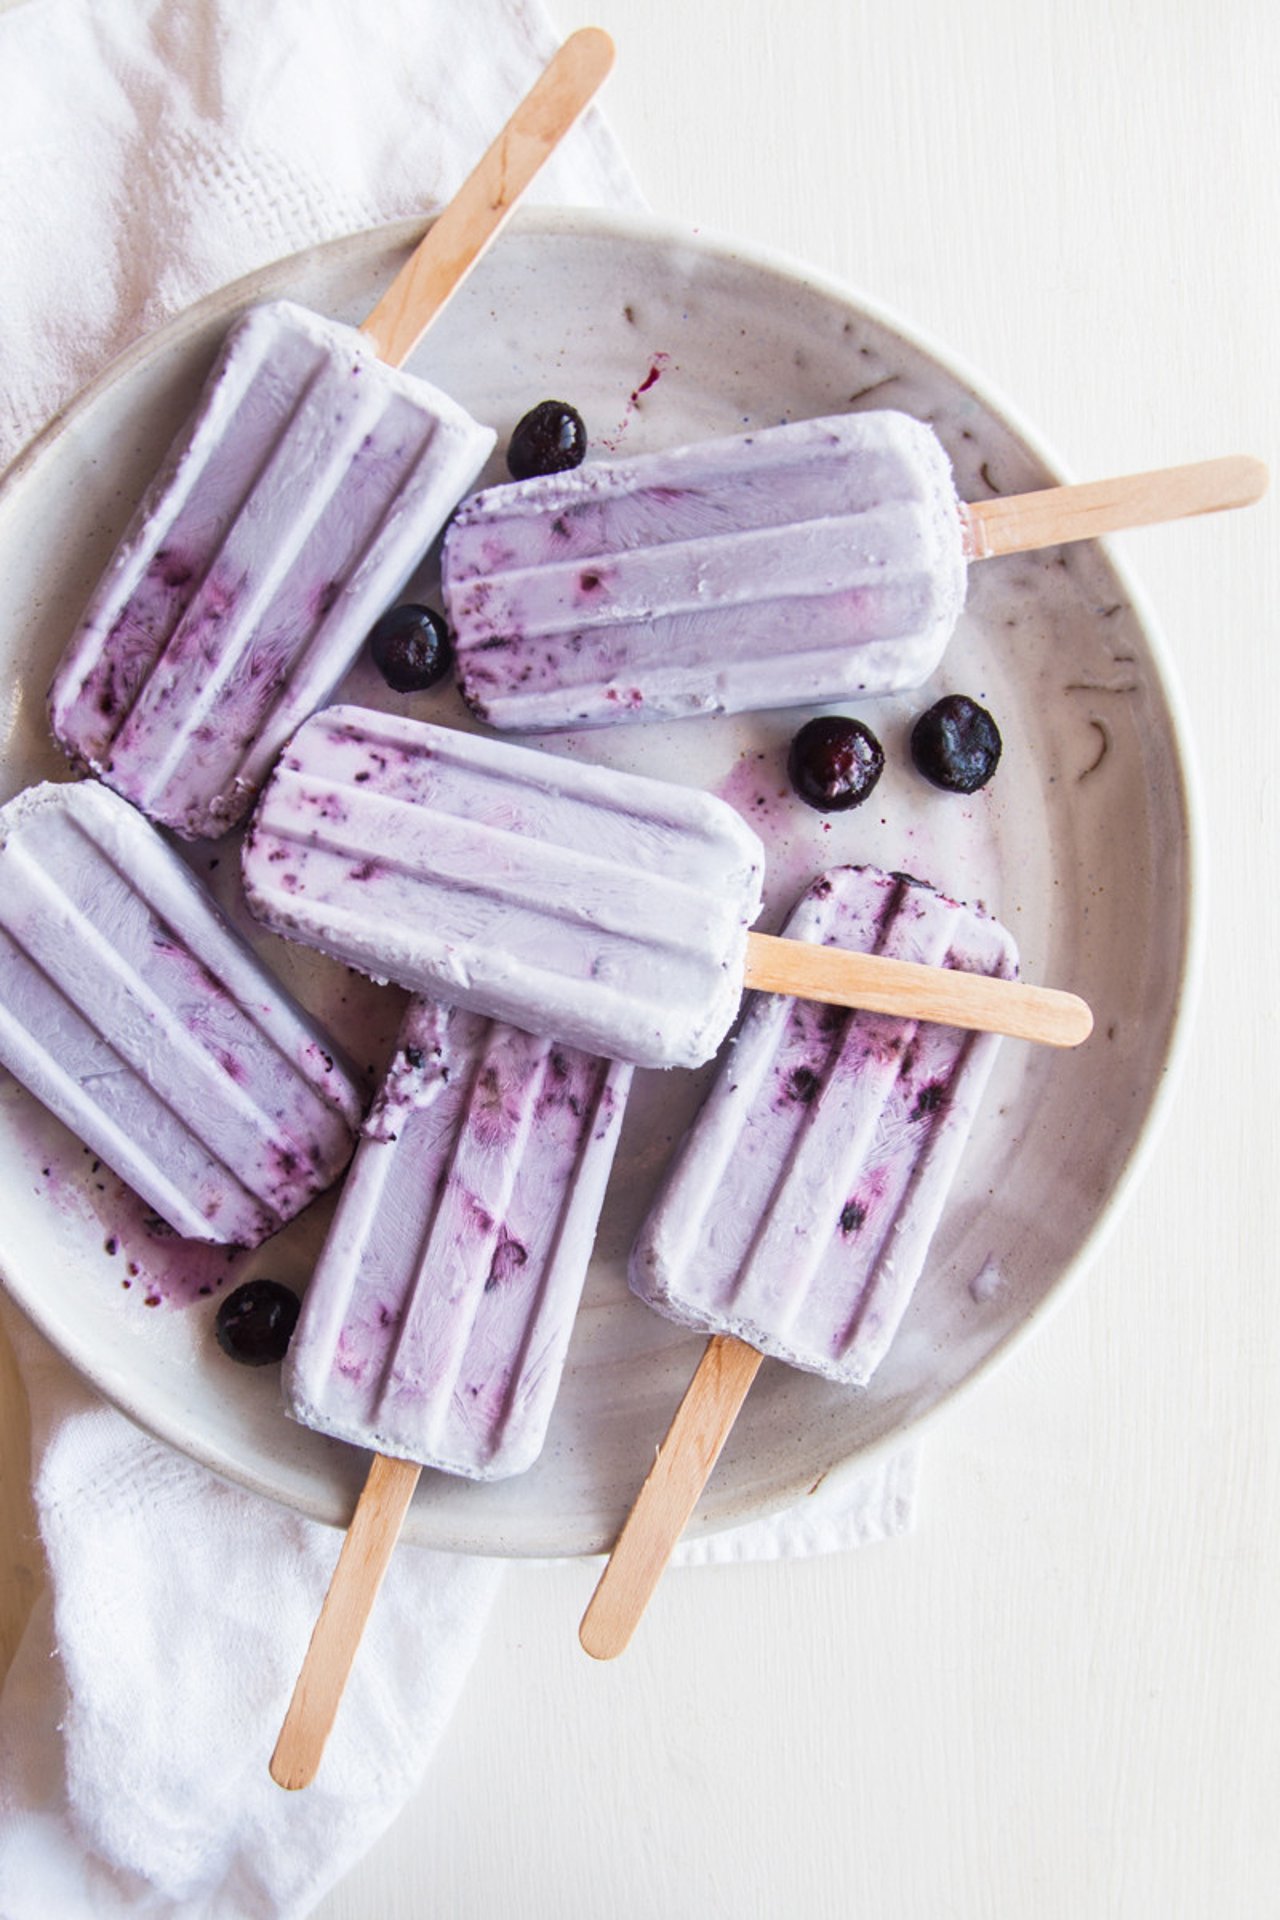 Blueberry popsicle